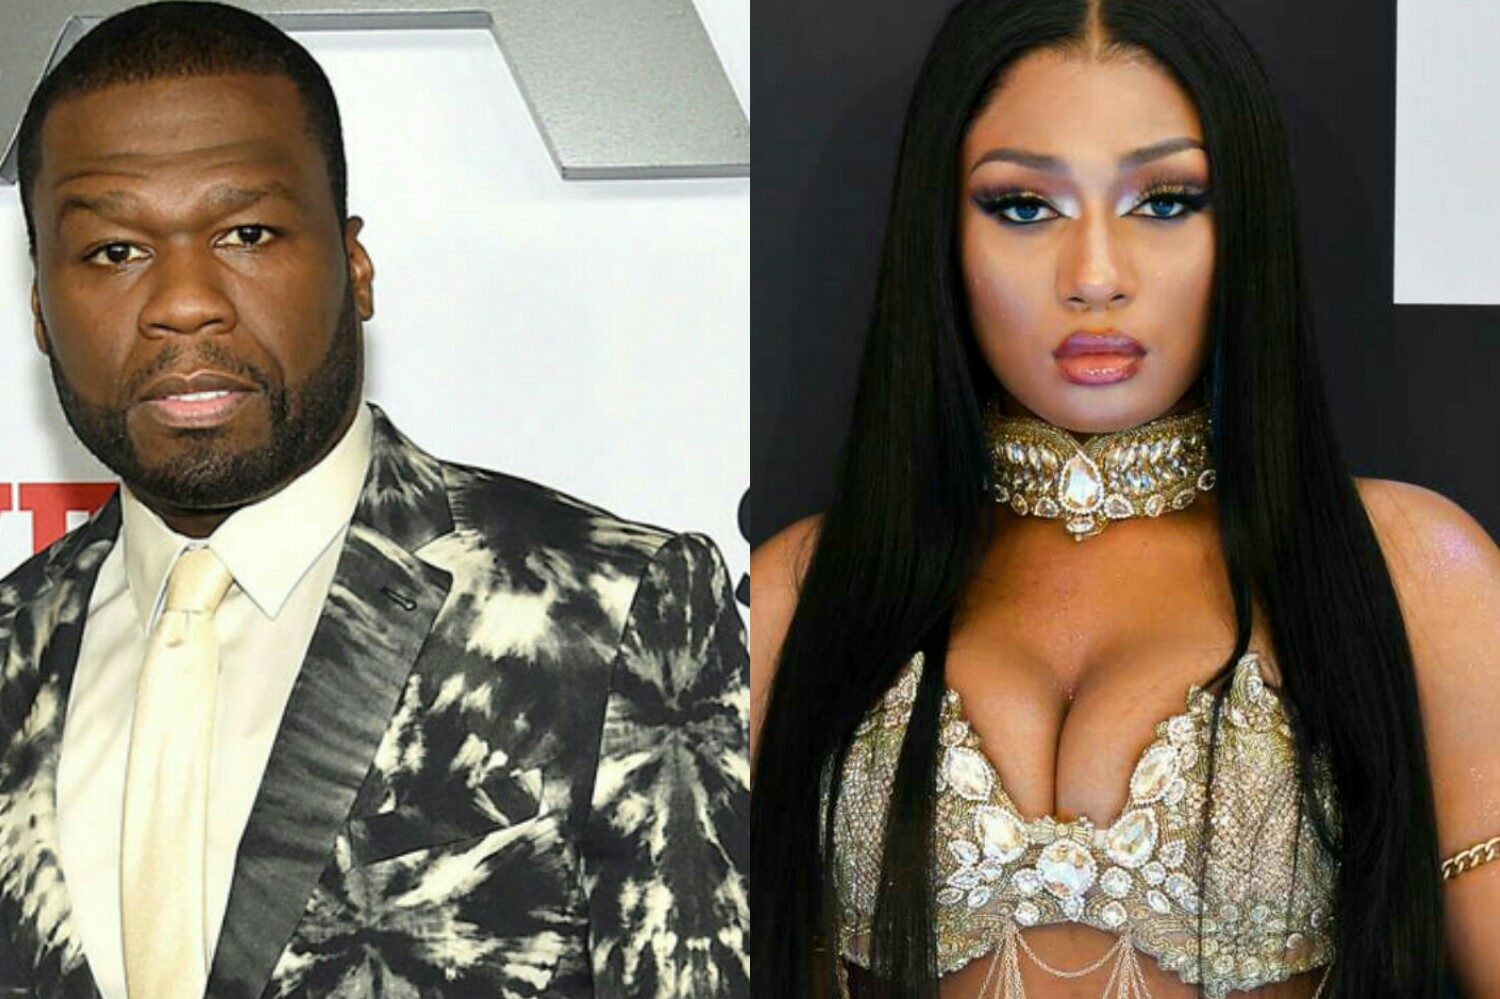 50 Cent Gives Megan Thee Stallion An Apology